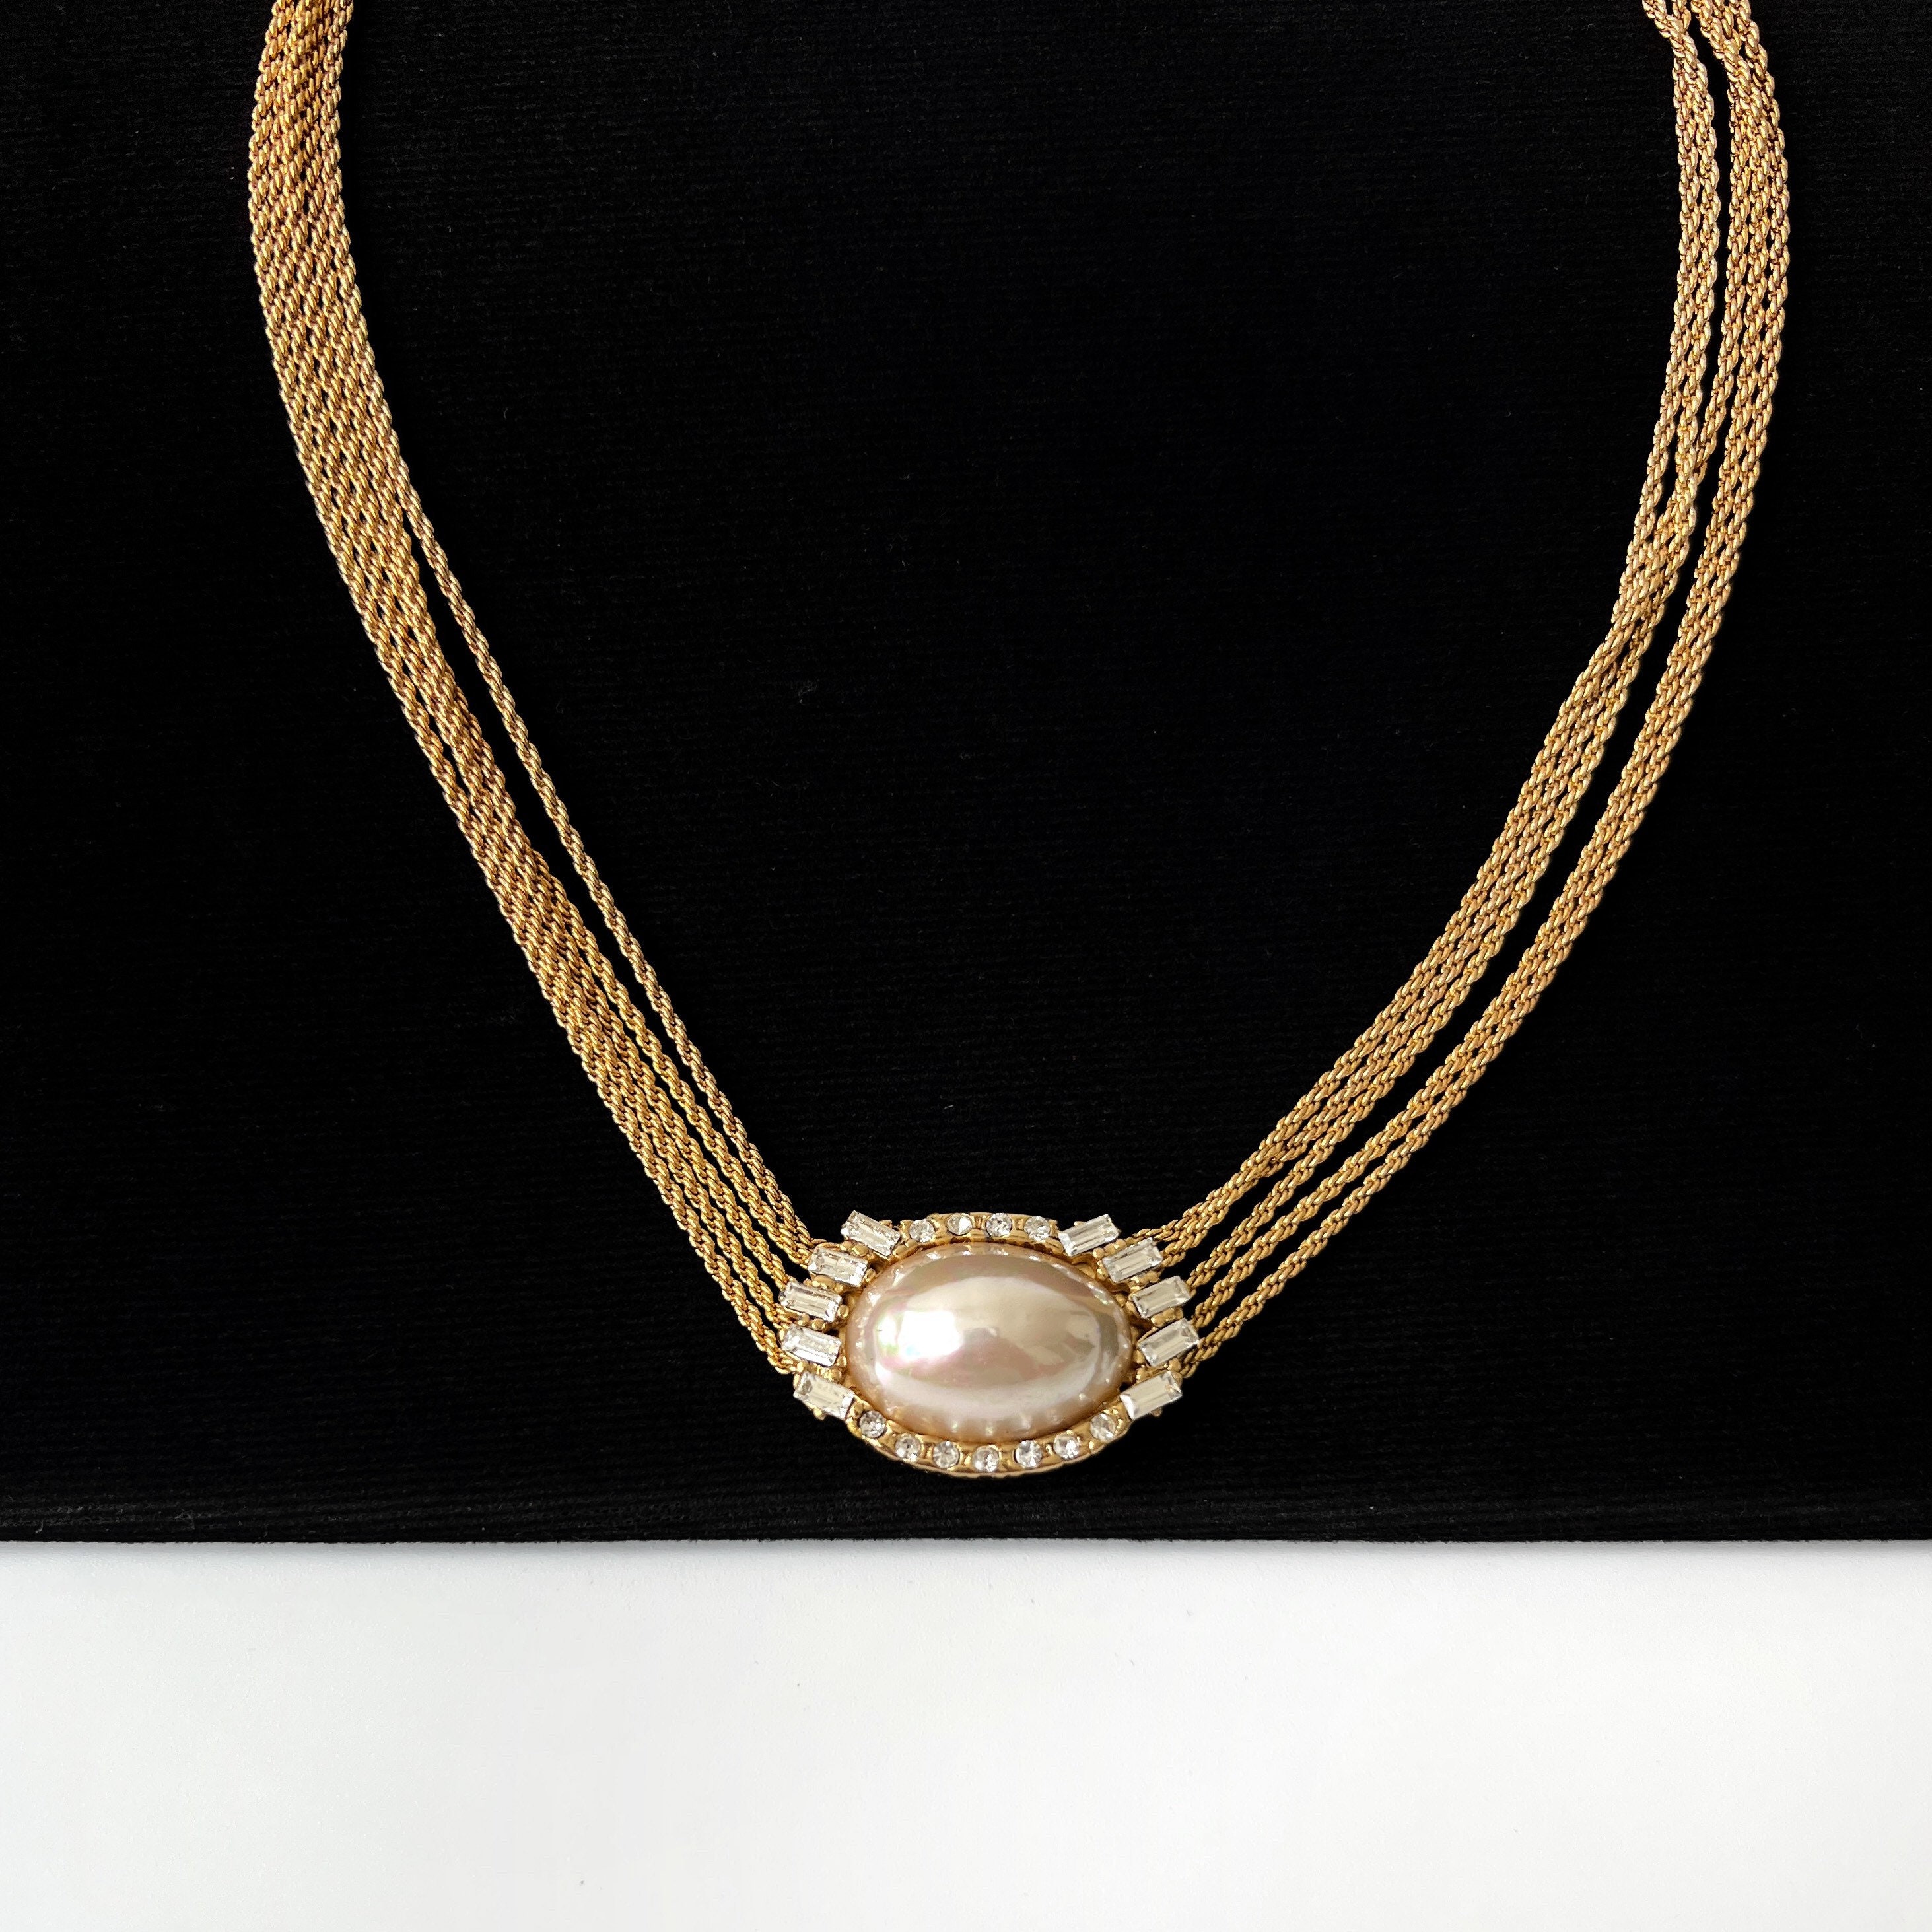 Dior Necklace with Crystal and Pearl UK